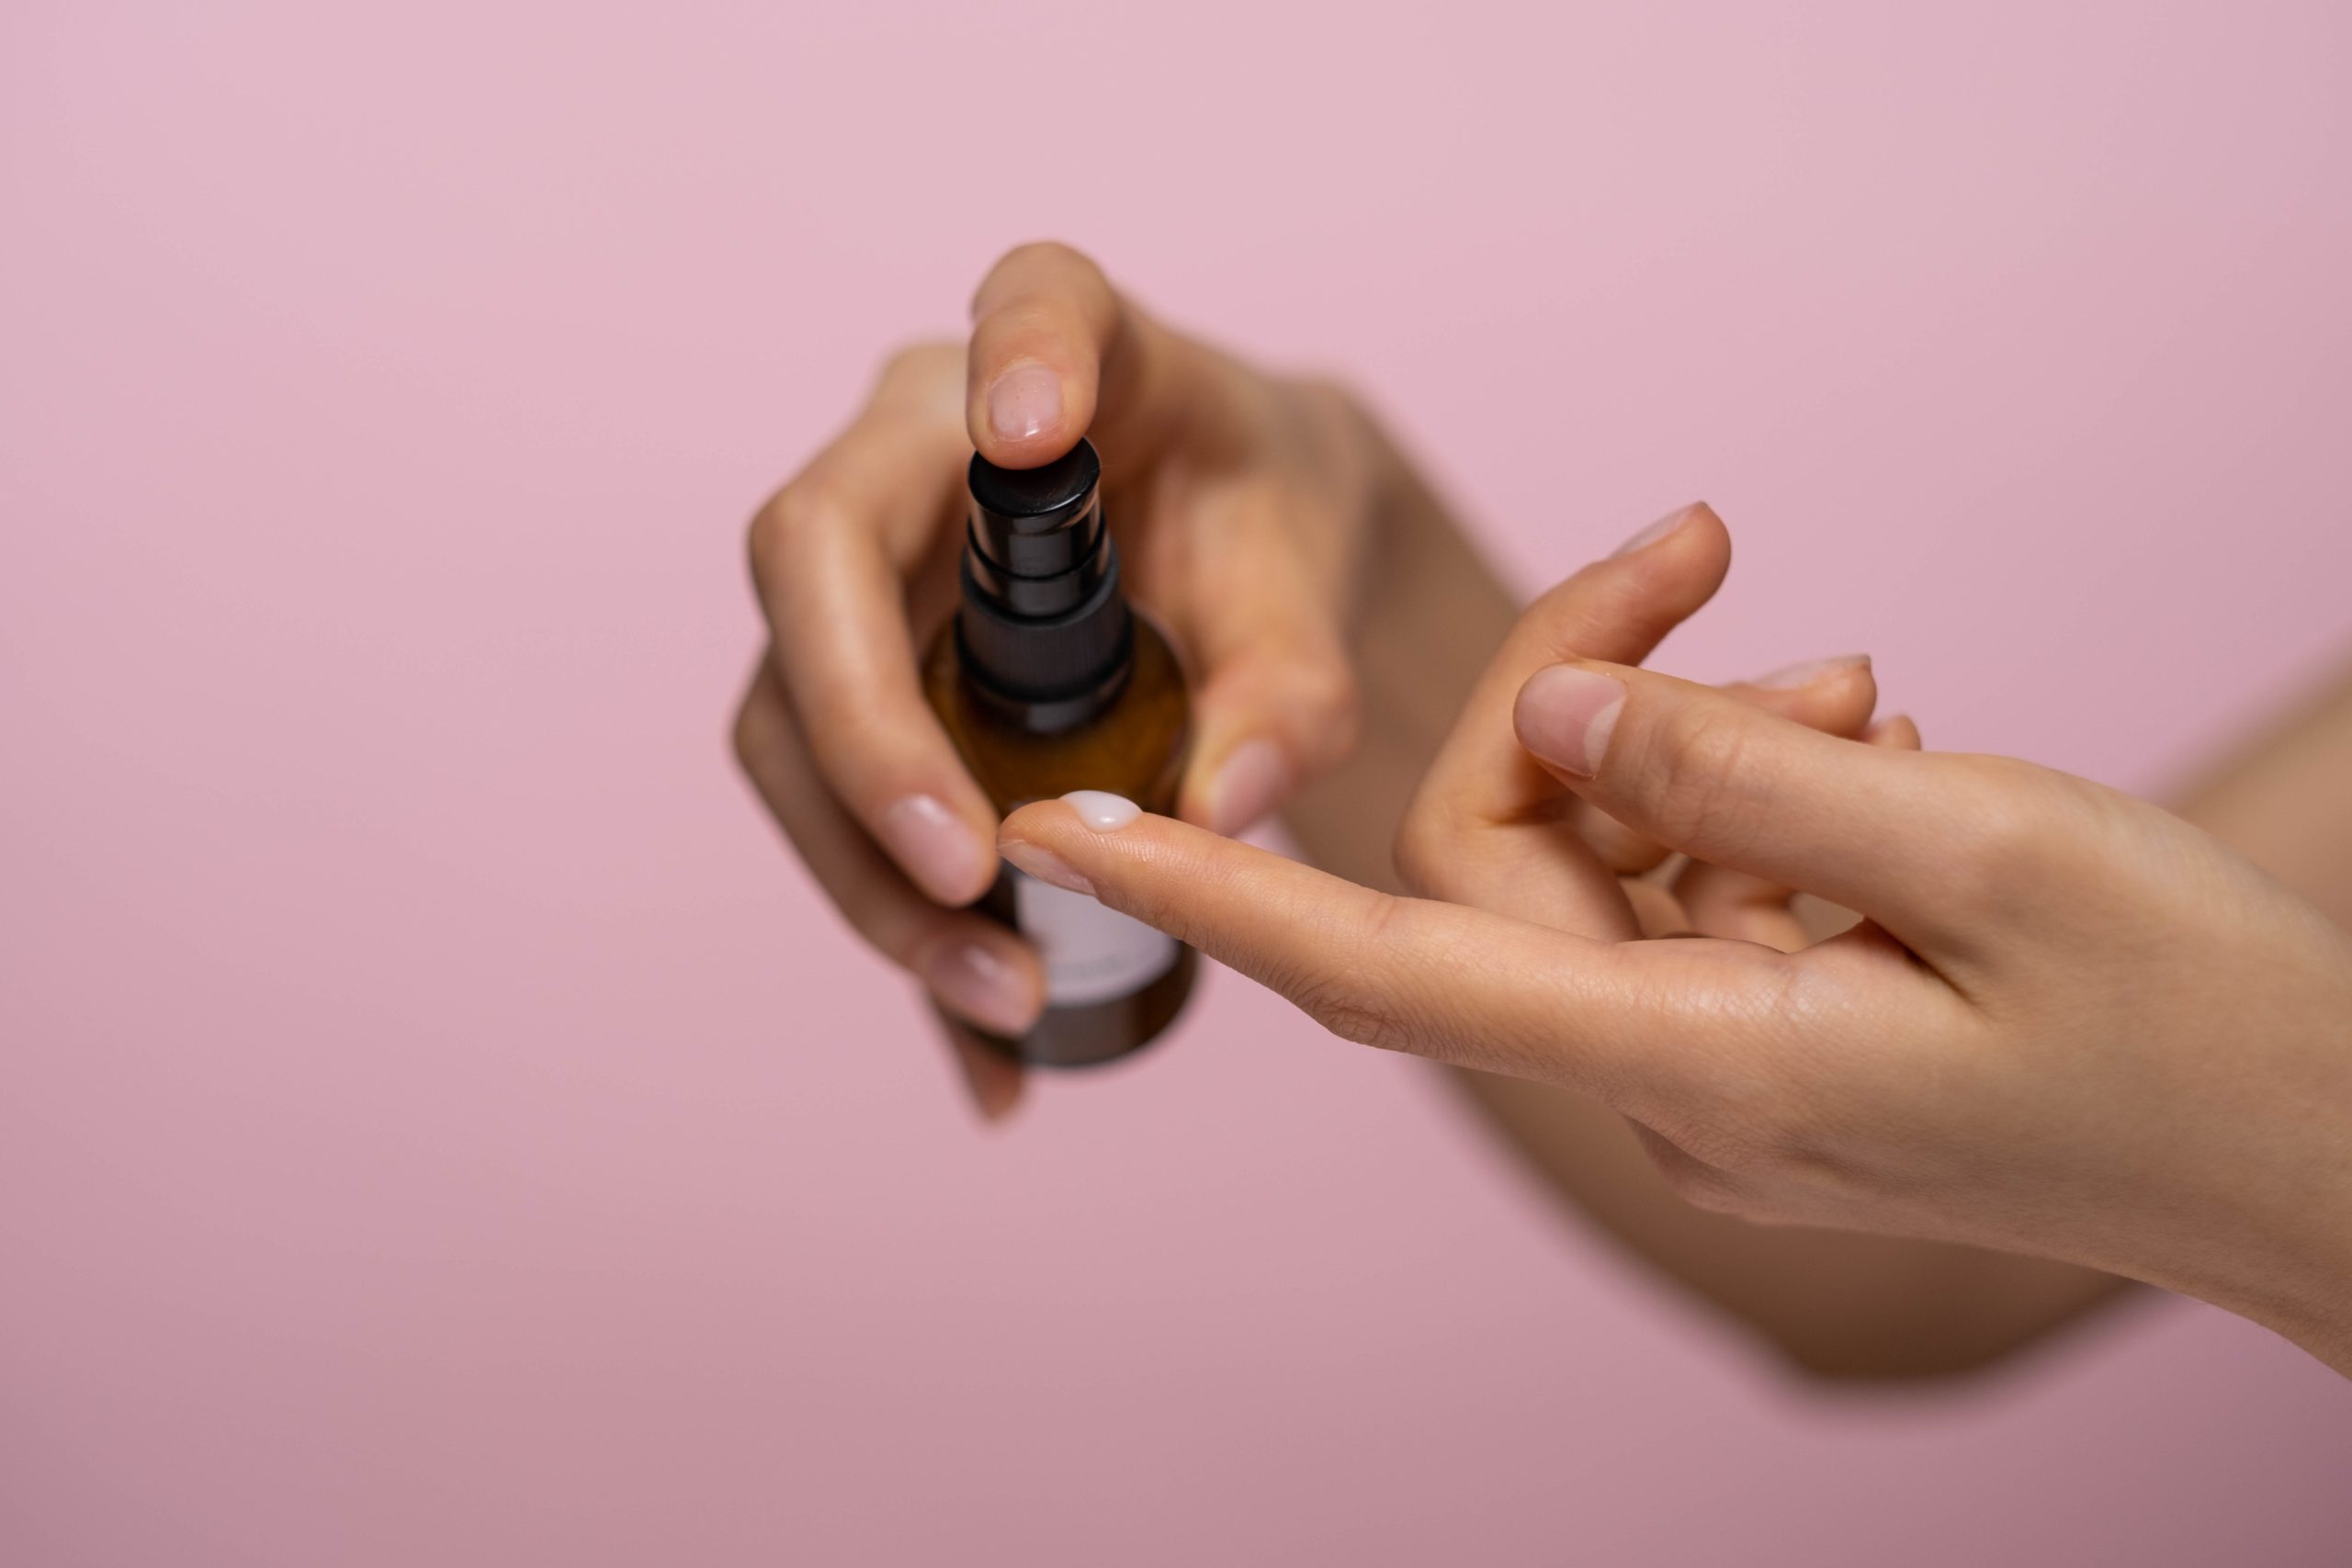 Woman pumping small bottle of lotion onto her finger in front of a pink background